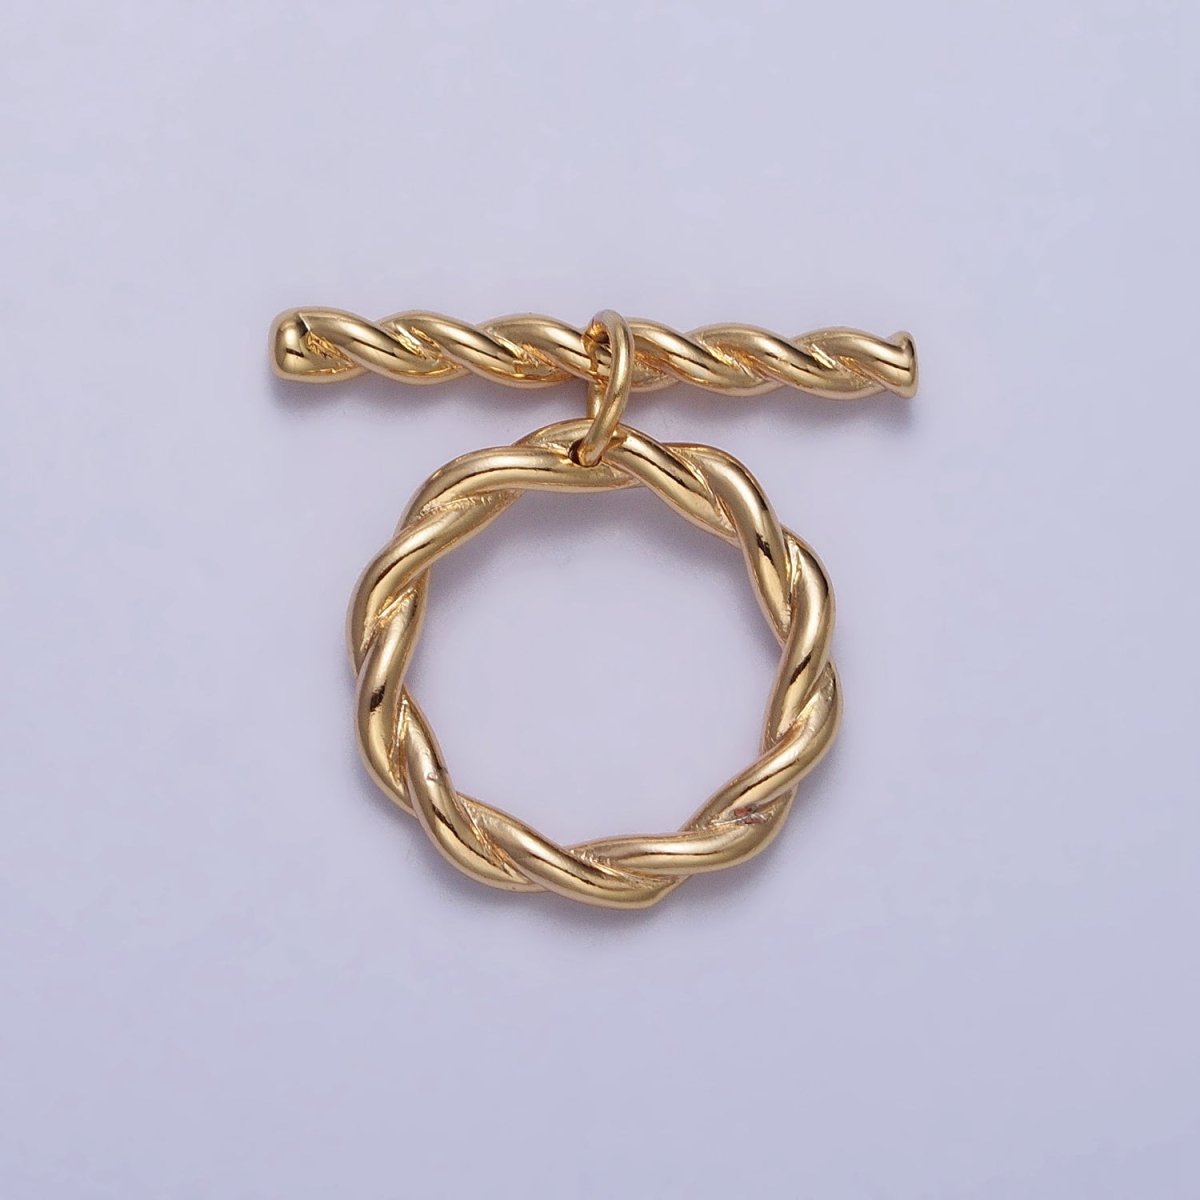 Twisted Rope Toggle Clasps Jewelry Closure Supply in Gold & Silver | Z-055 Z-056 - DLUXCA